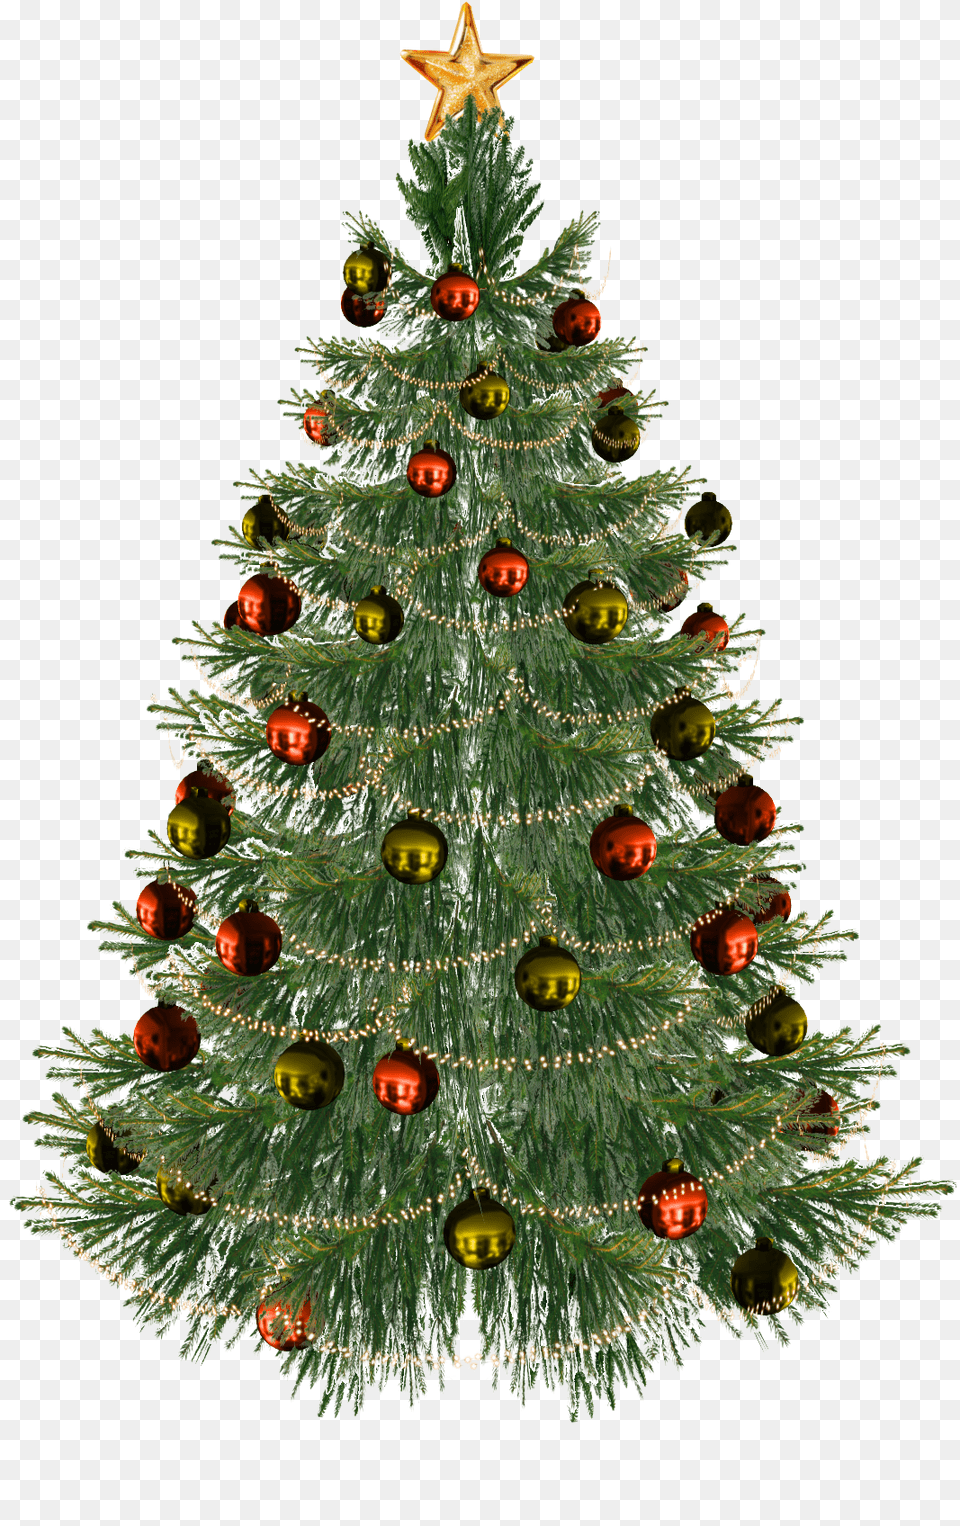 Christmas Tree White Background Mmd Christmas Tree, Plant, Christmas Decorations, Festival, Chandelier Png Image